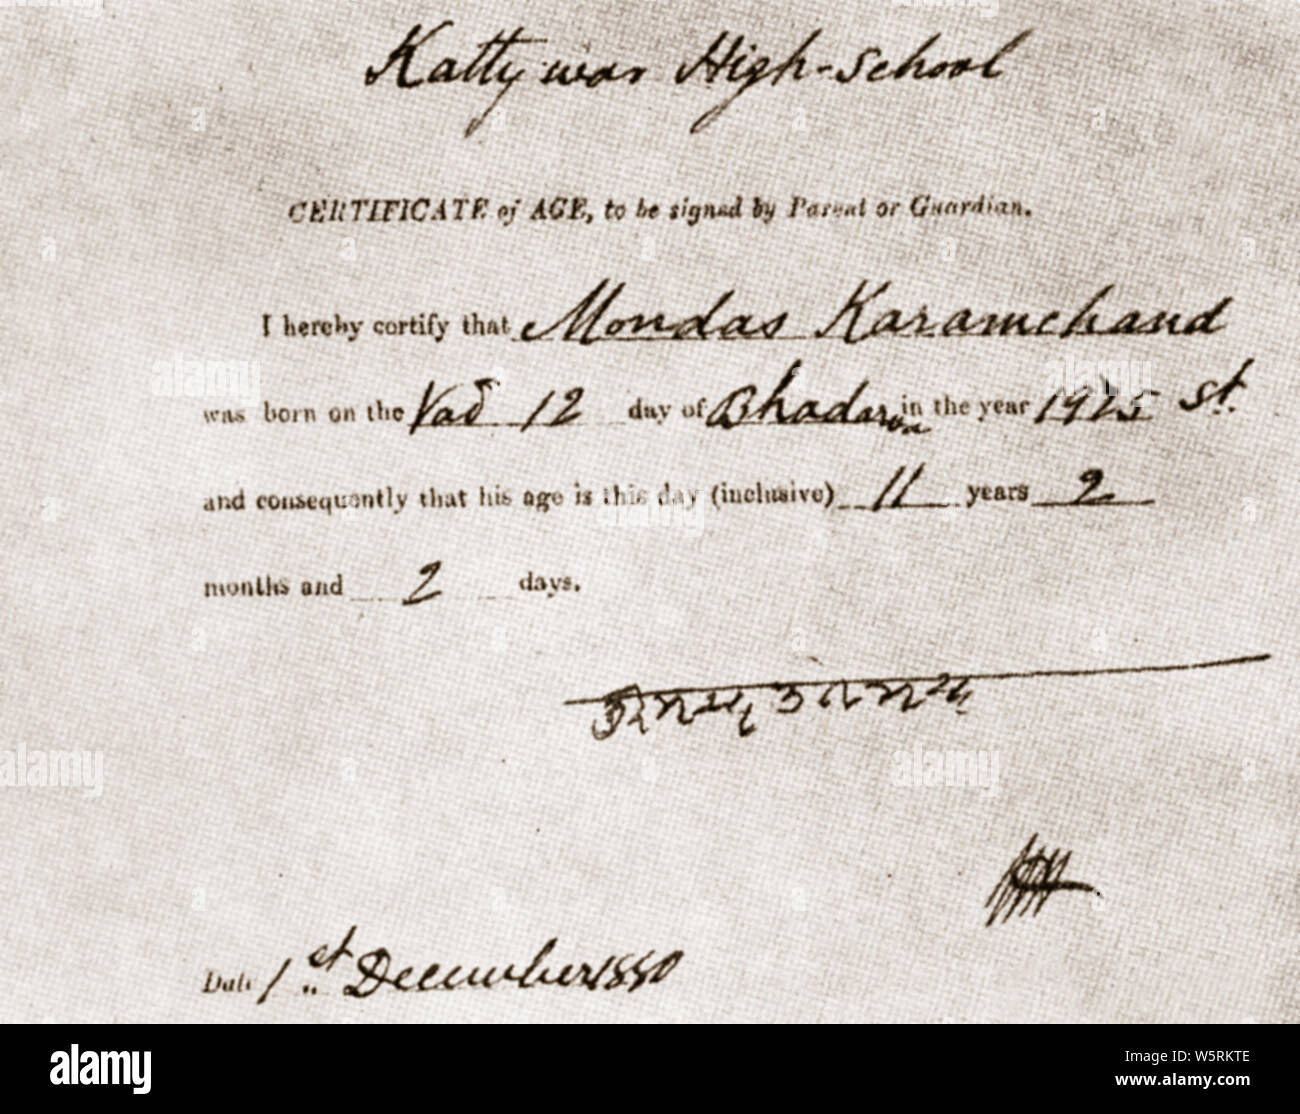 Age certificate of Mohandas Karamchand Gandhi signed by father Gujarat India 1880 Stock Photo